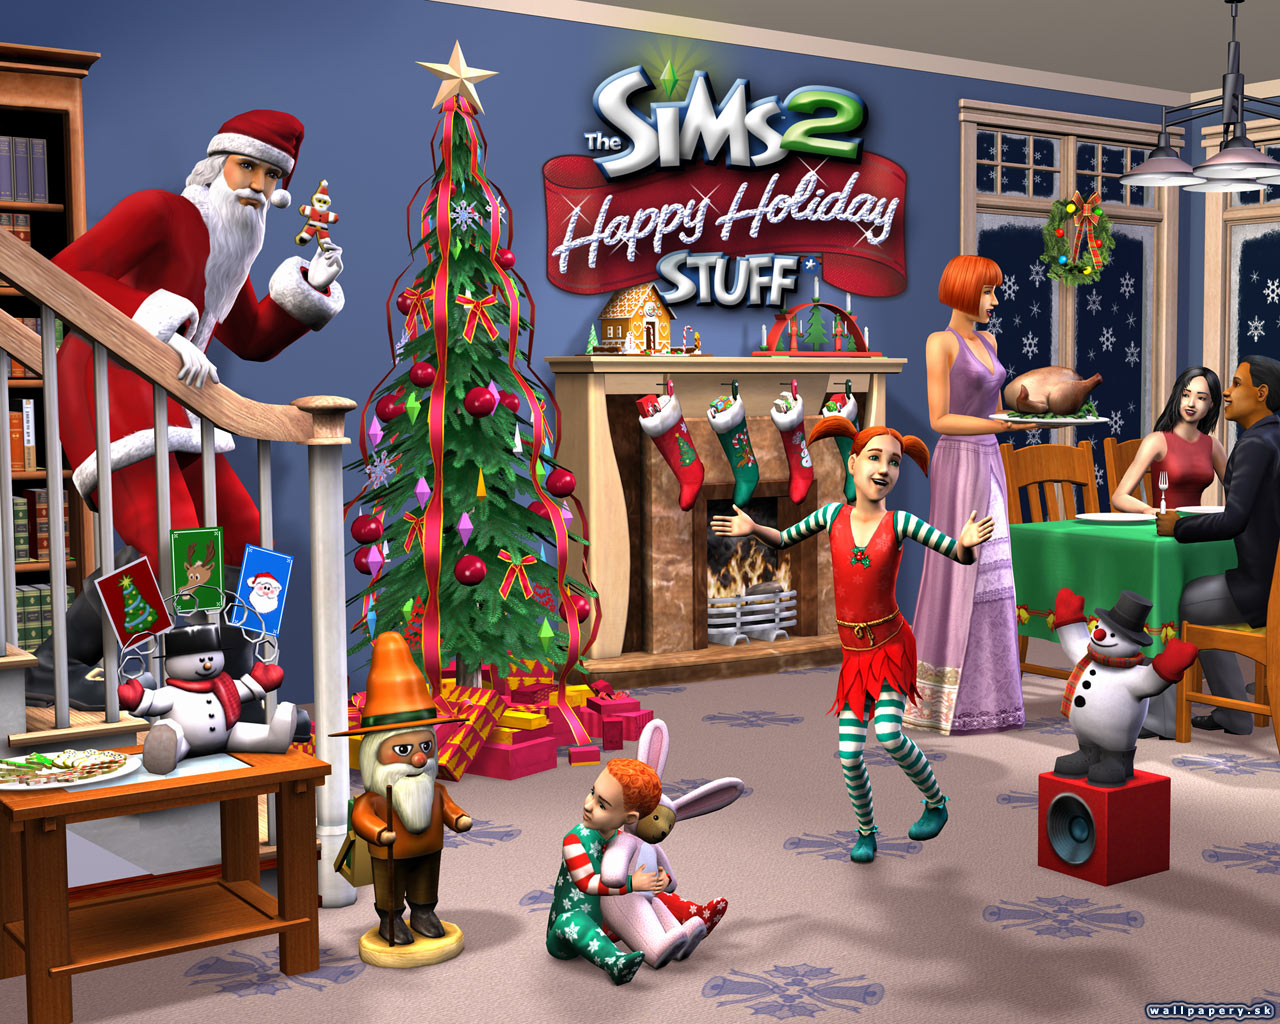 The Sims 2: Happy Holiday Stuff - wallpaper 2